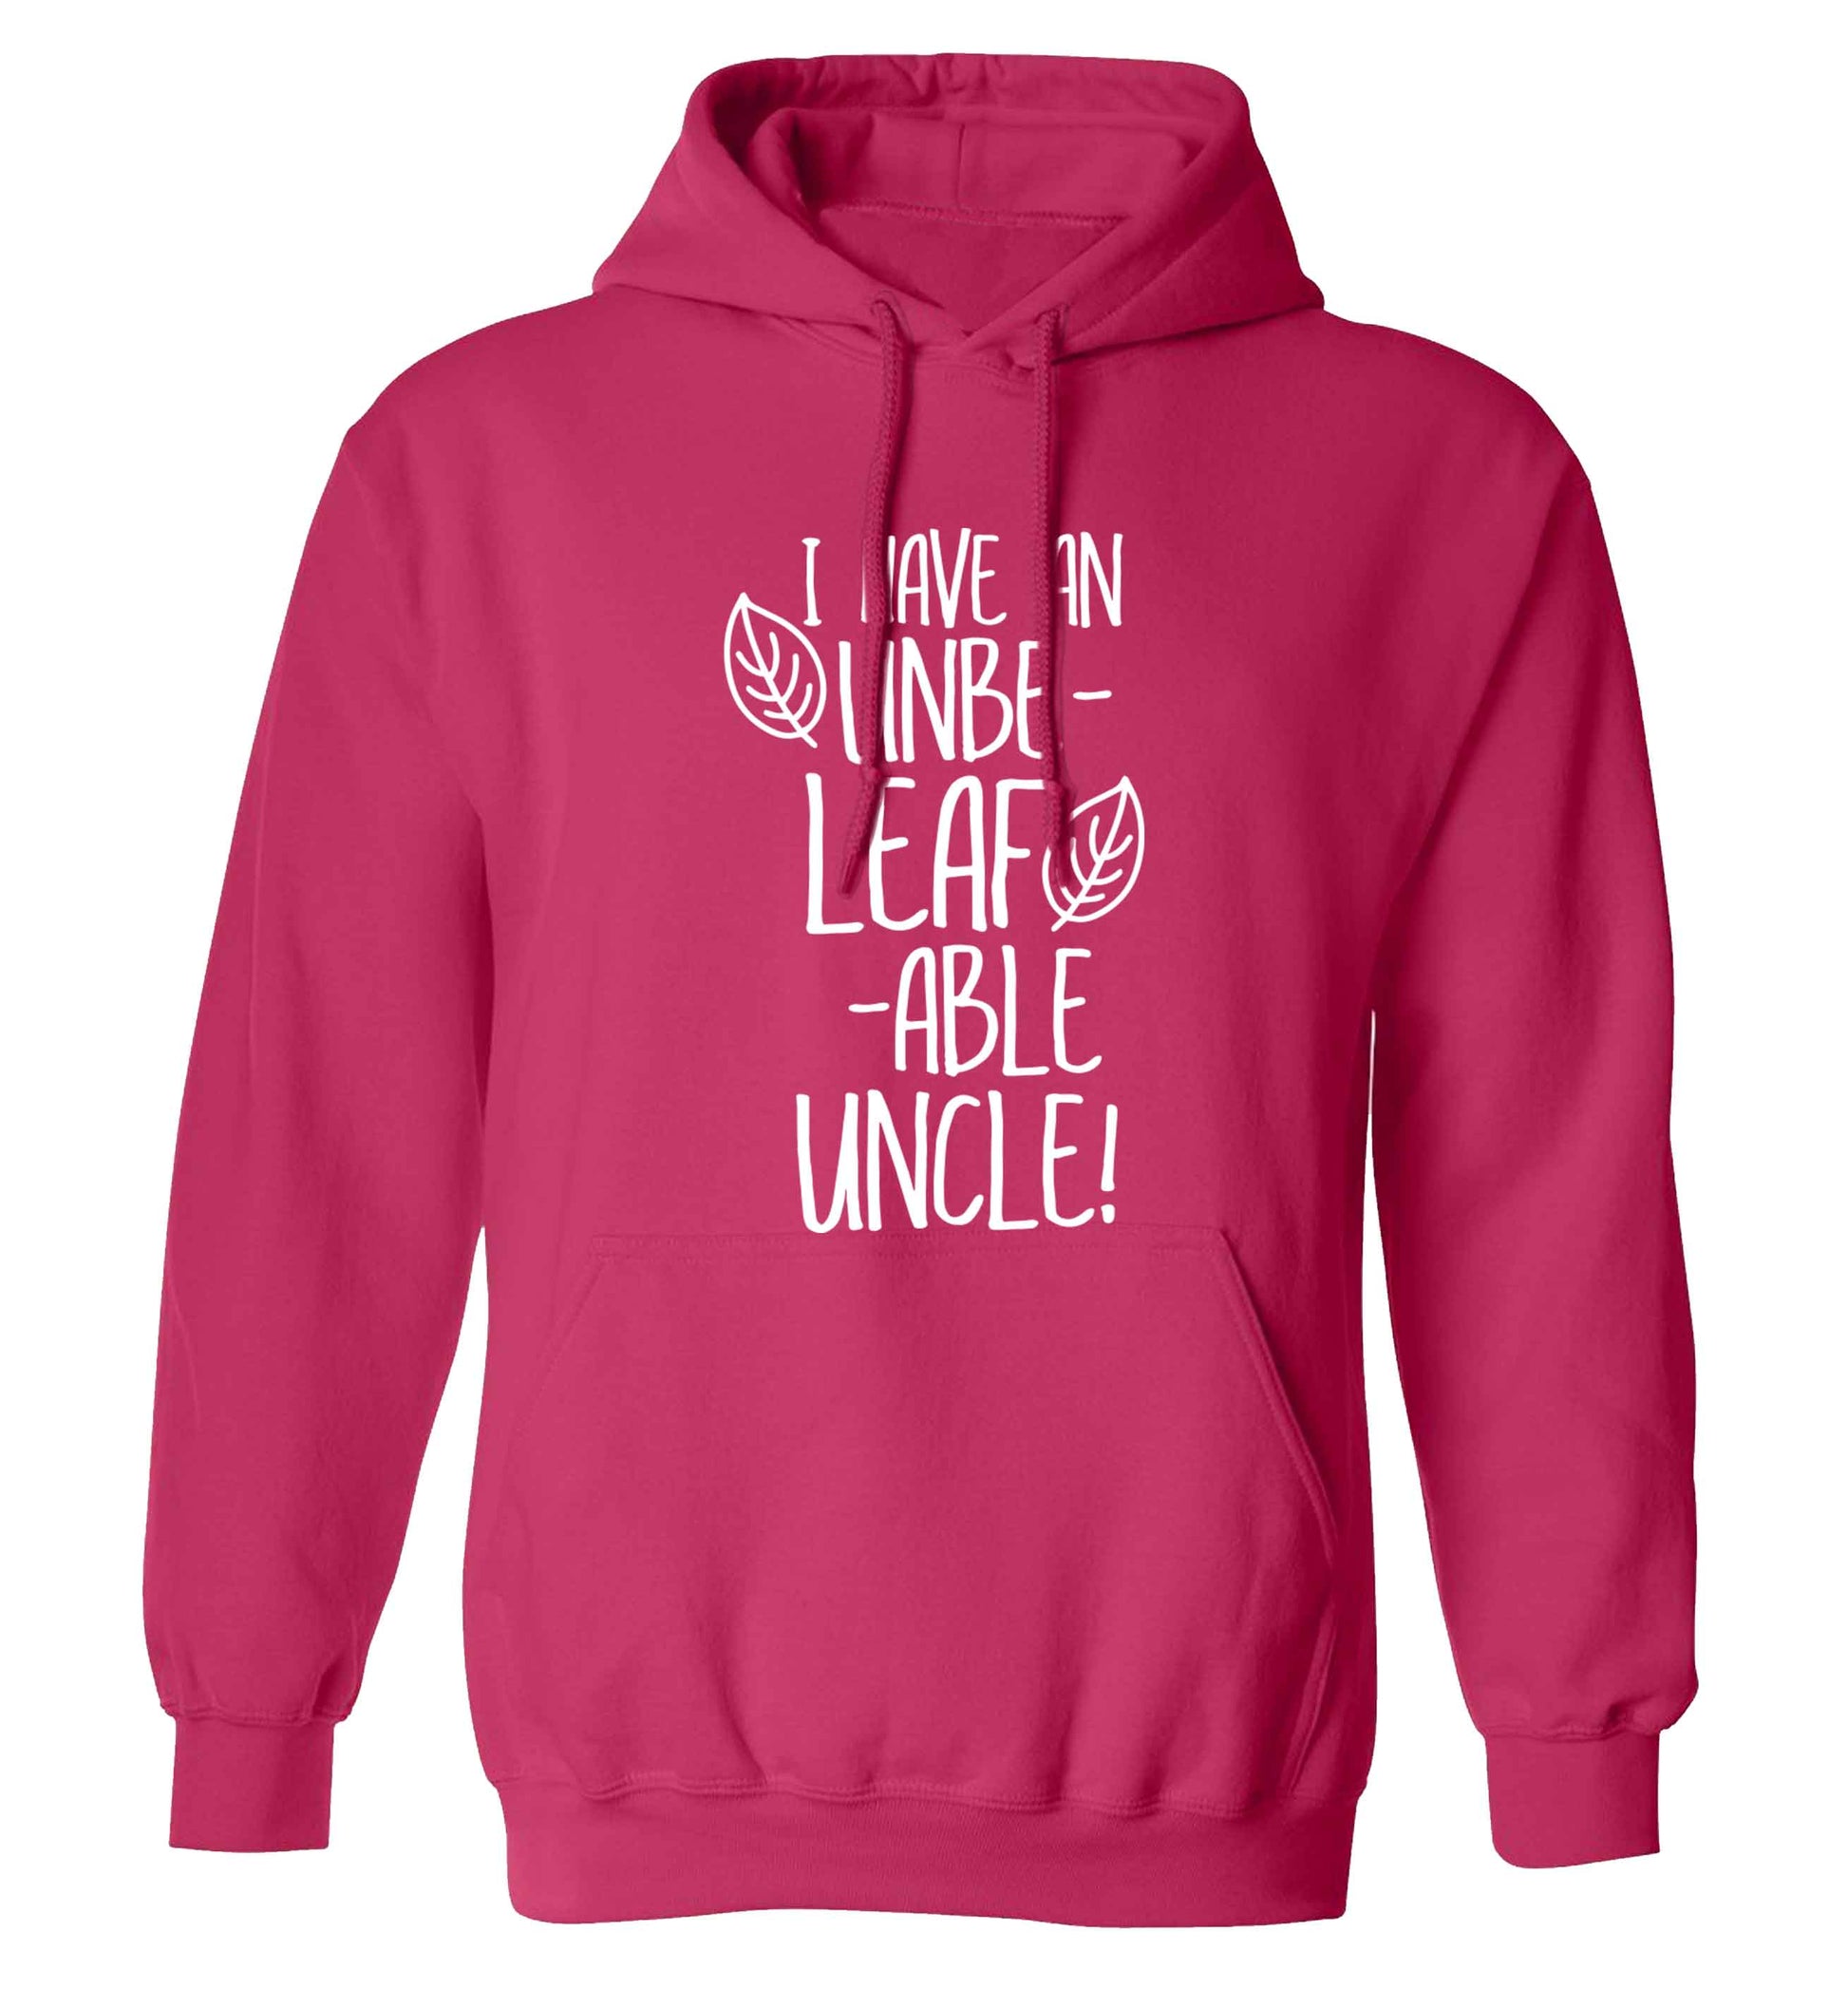 I have an unbe-leaf-able uncle adults unisex pink hoodie 2XL